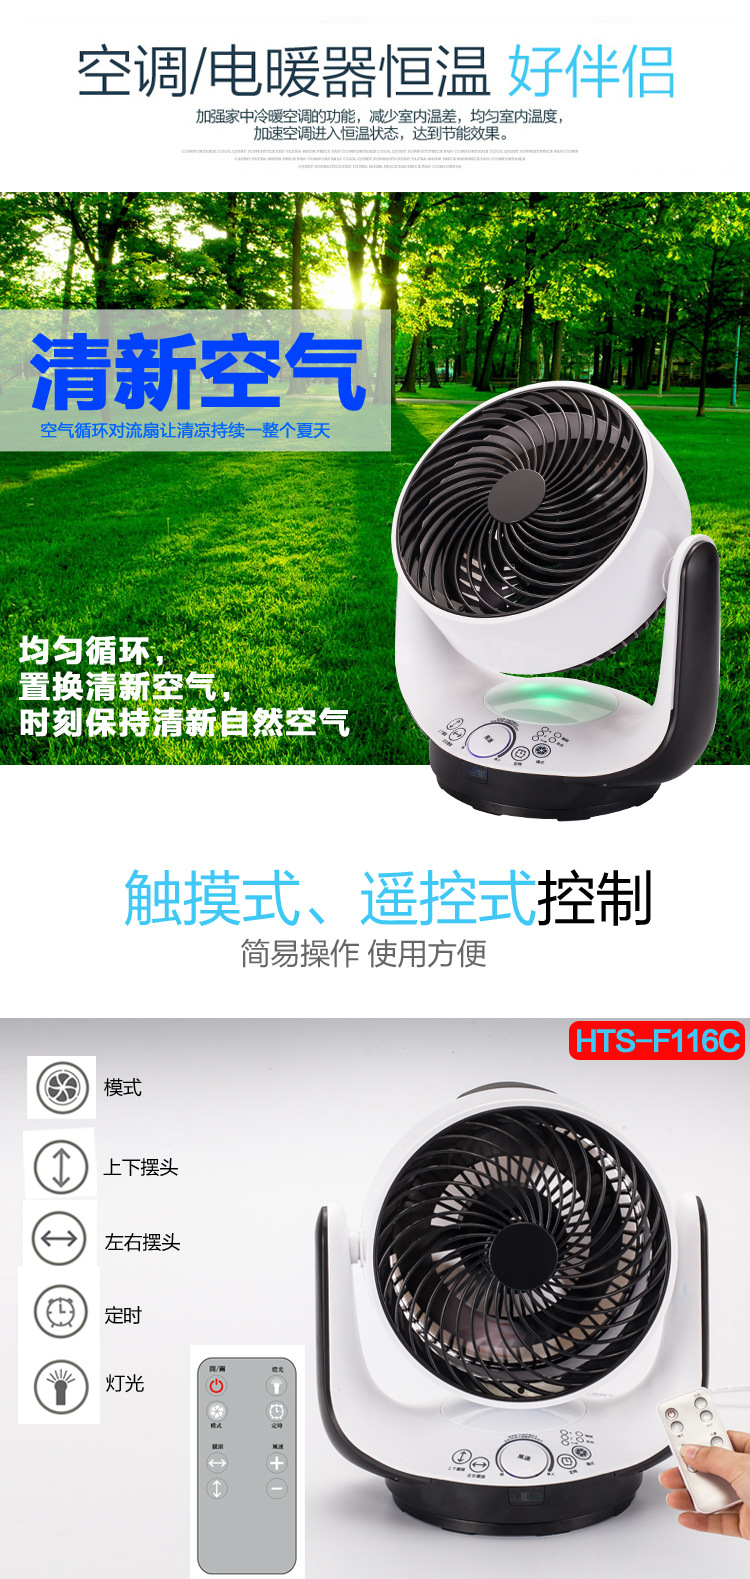 Intelligent remote control ventilation and dedusting of turbine power cycle fan1